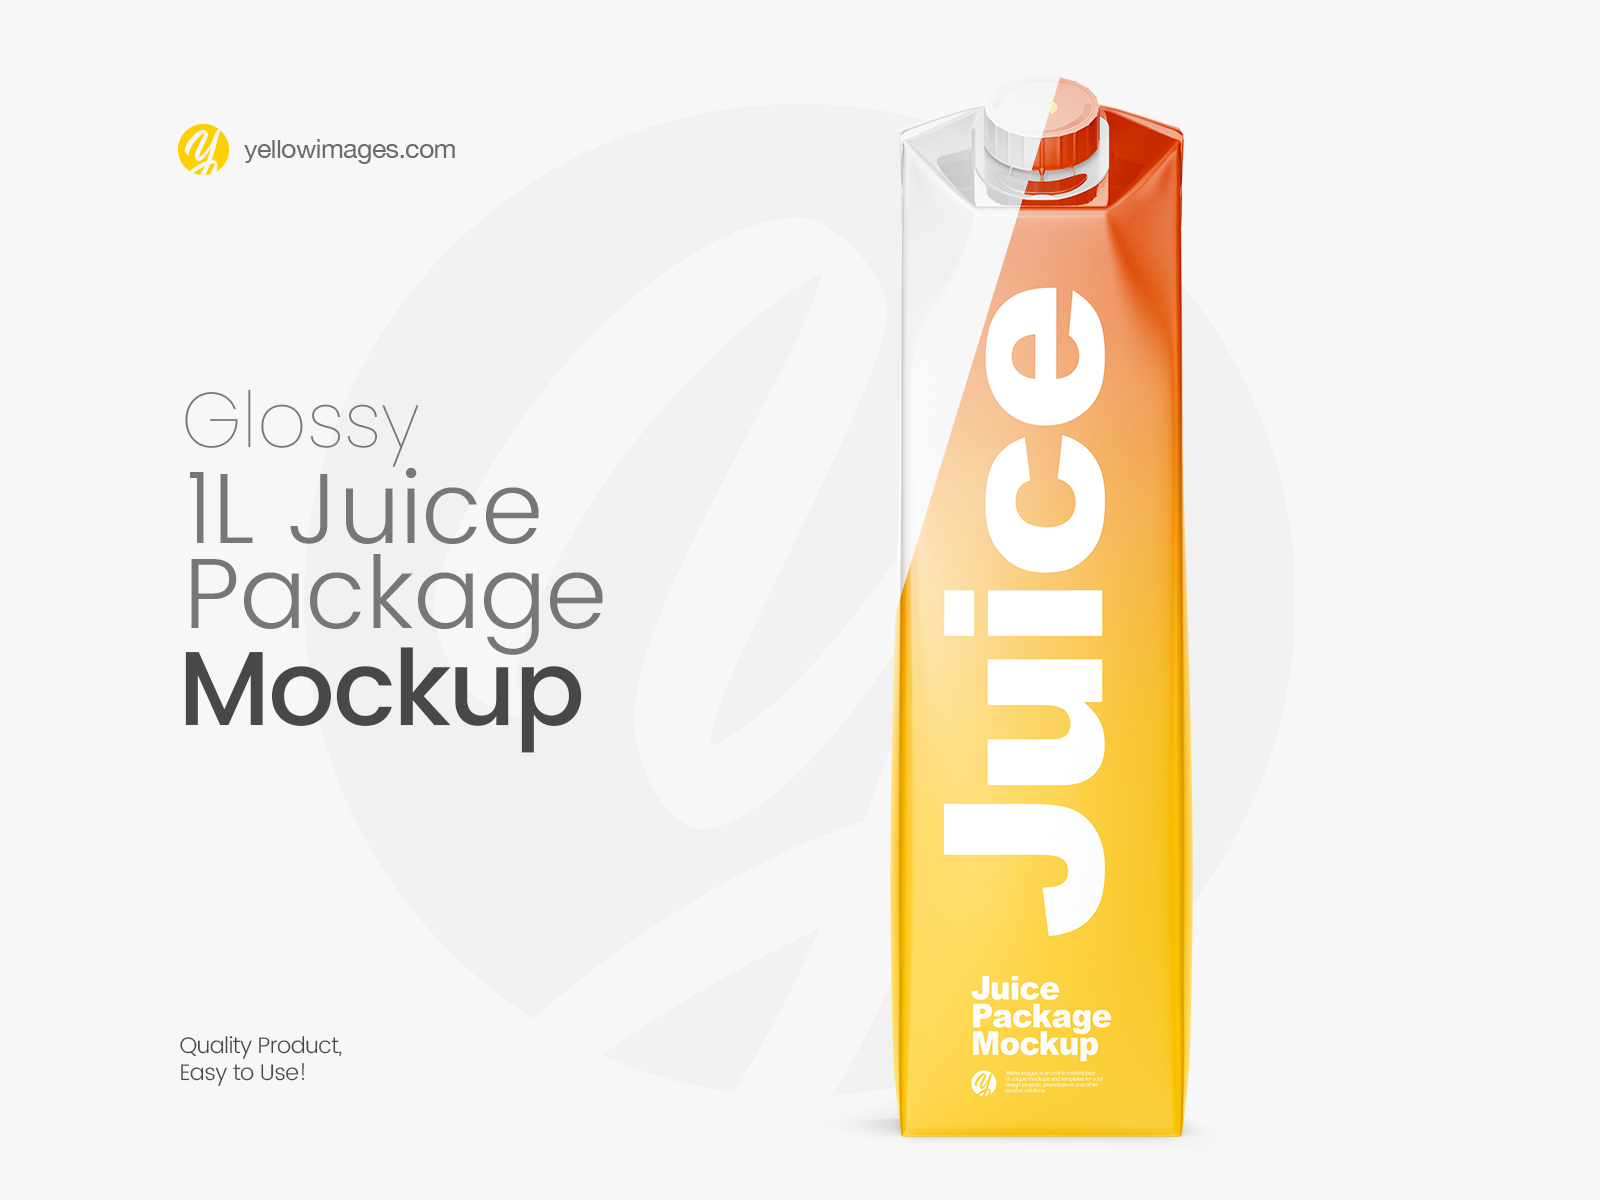 Download 1l Glossy Juice Package Mockup Front View By Dmytro Ovcharenko On Dribbble PSD Mockup Templates